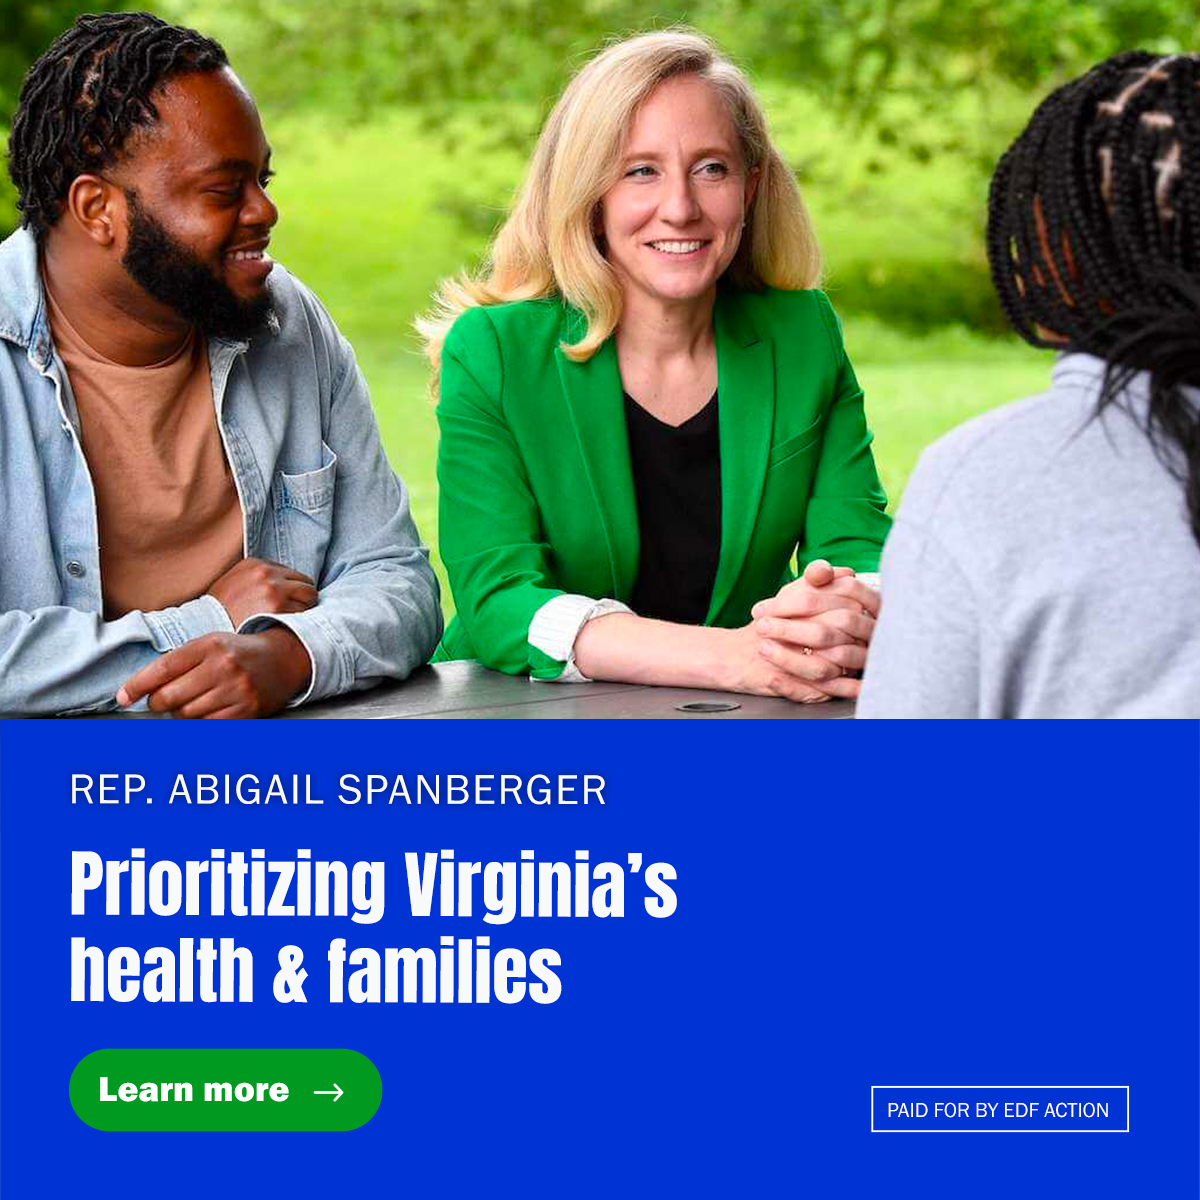 Rep. Spanberger Prioritizing Virginia's Health & Families